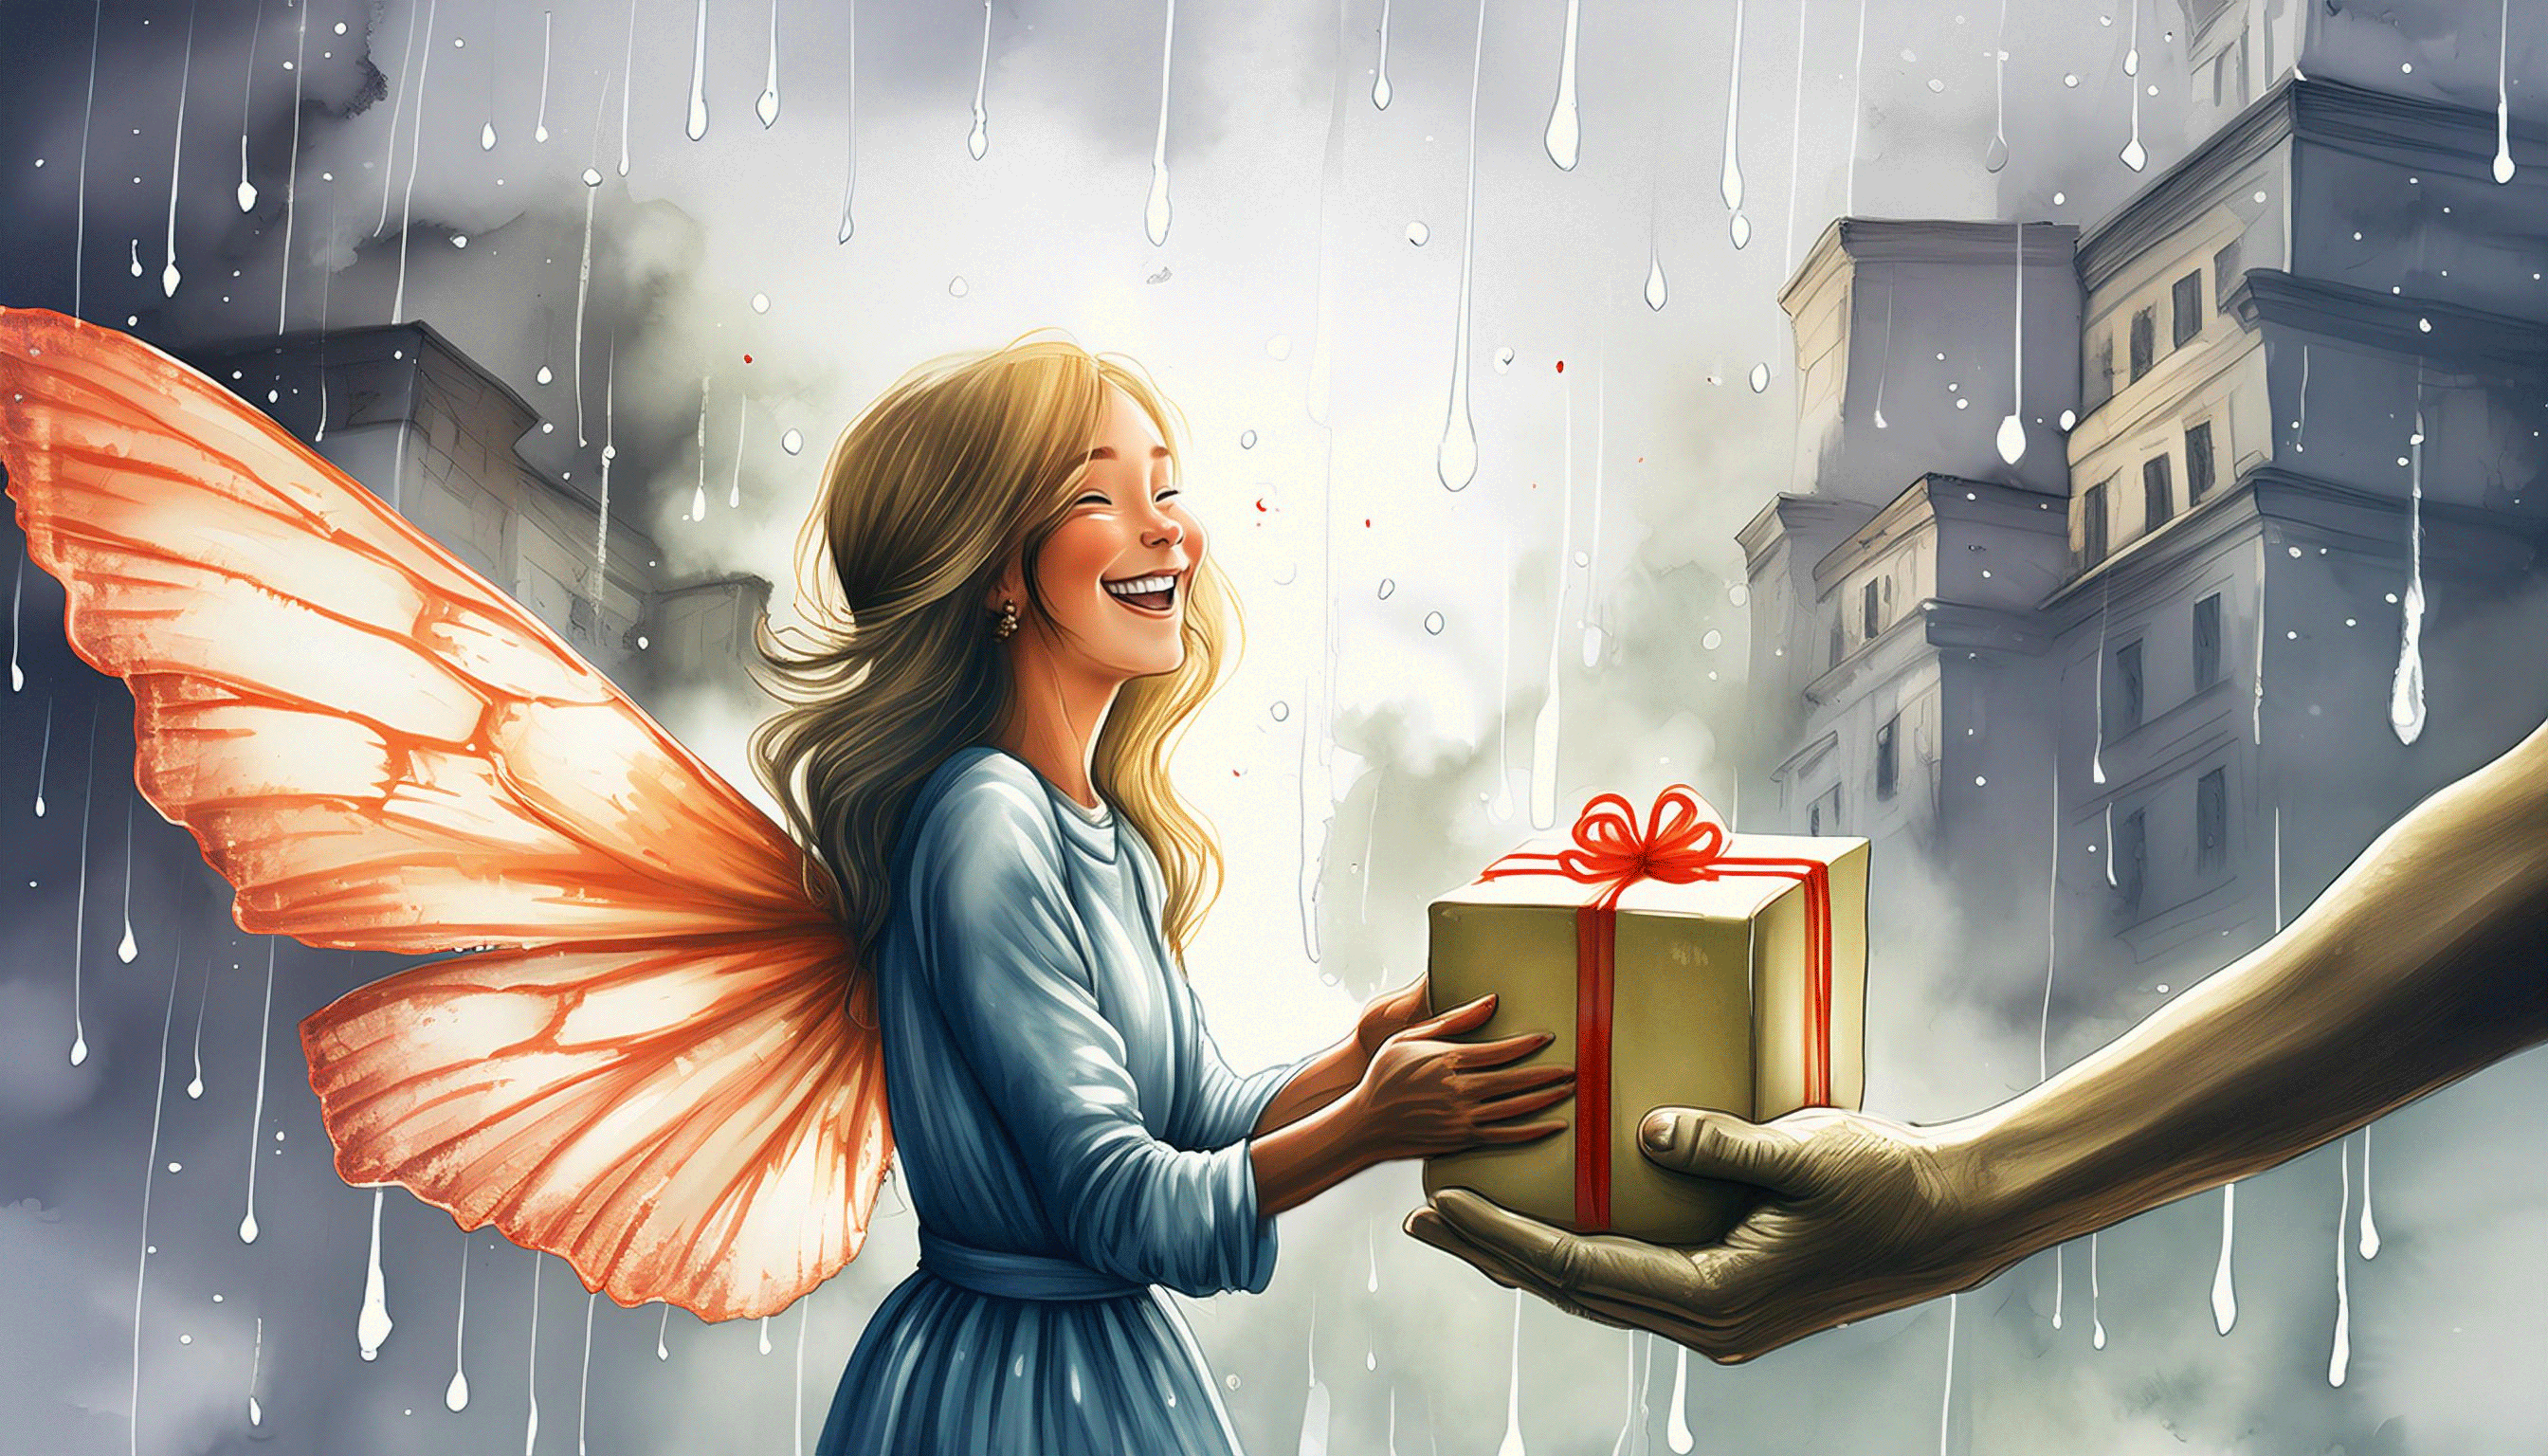 An image of a happy-looking fairy giving a present to an outstretched hand, the picture changes to a mischievous-looking fairy giving a present to an outstretched hand and then quickly reverts back.